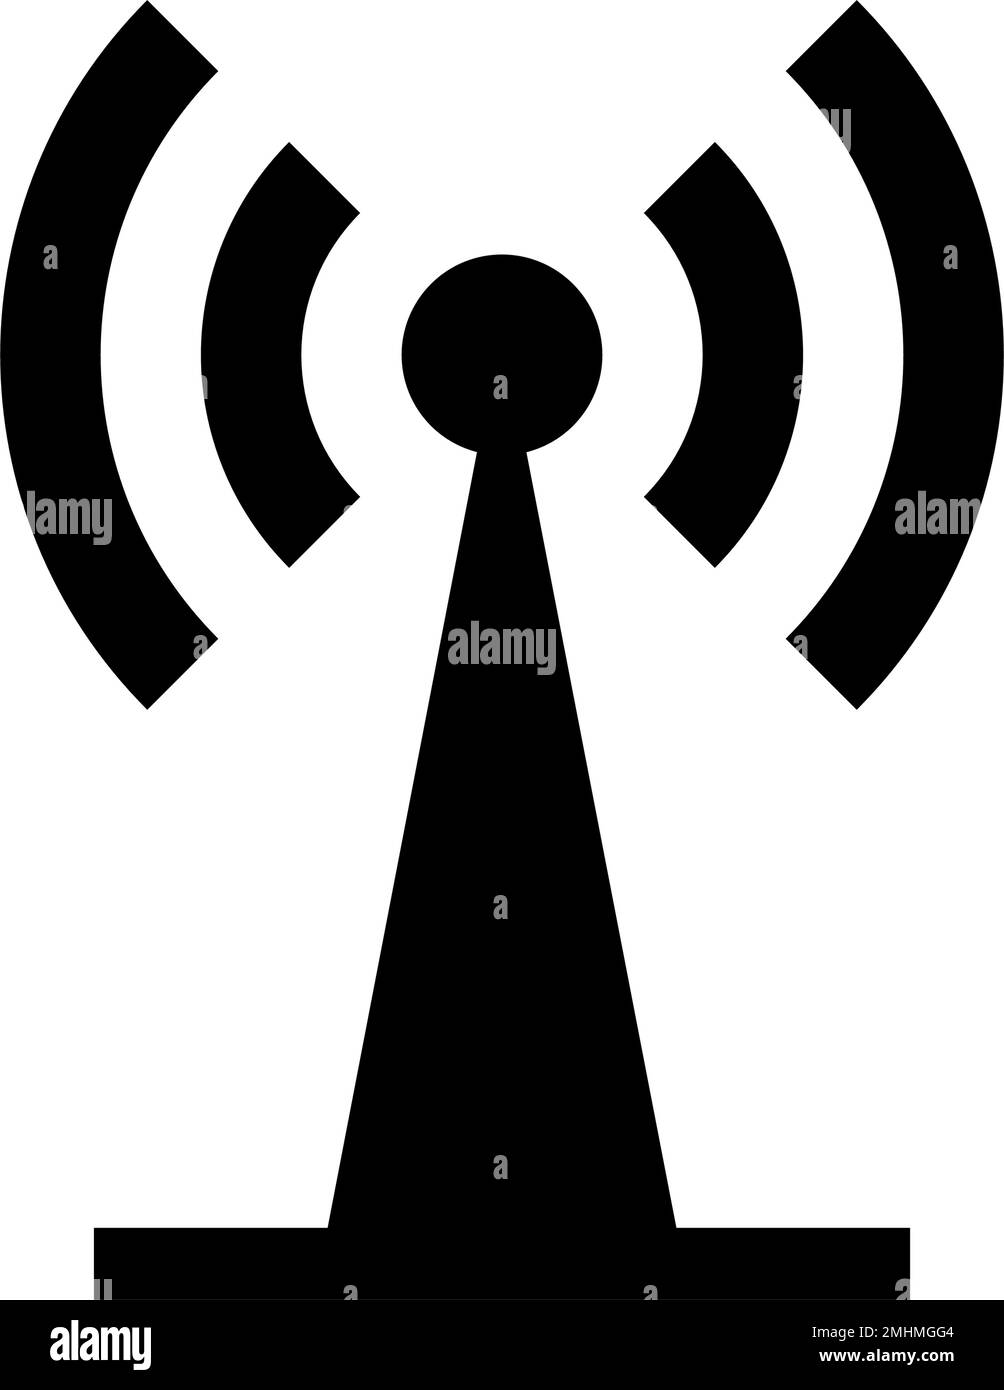 Base station silhouette icon. Radio wave and communication tower. Editable vector. Stock Vector